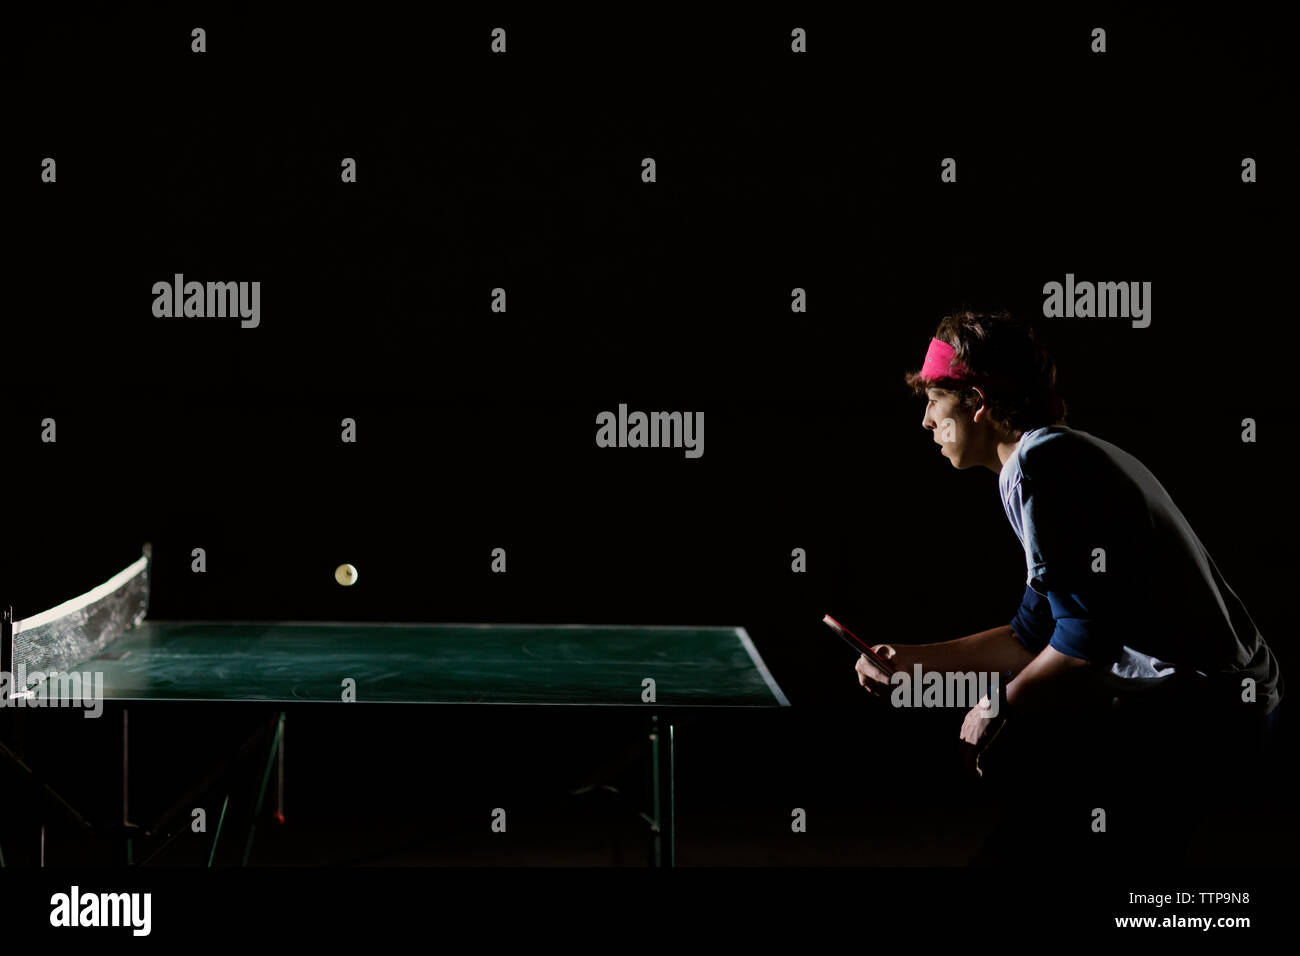 Man playing table tennis against black background Stock Photo